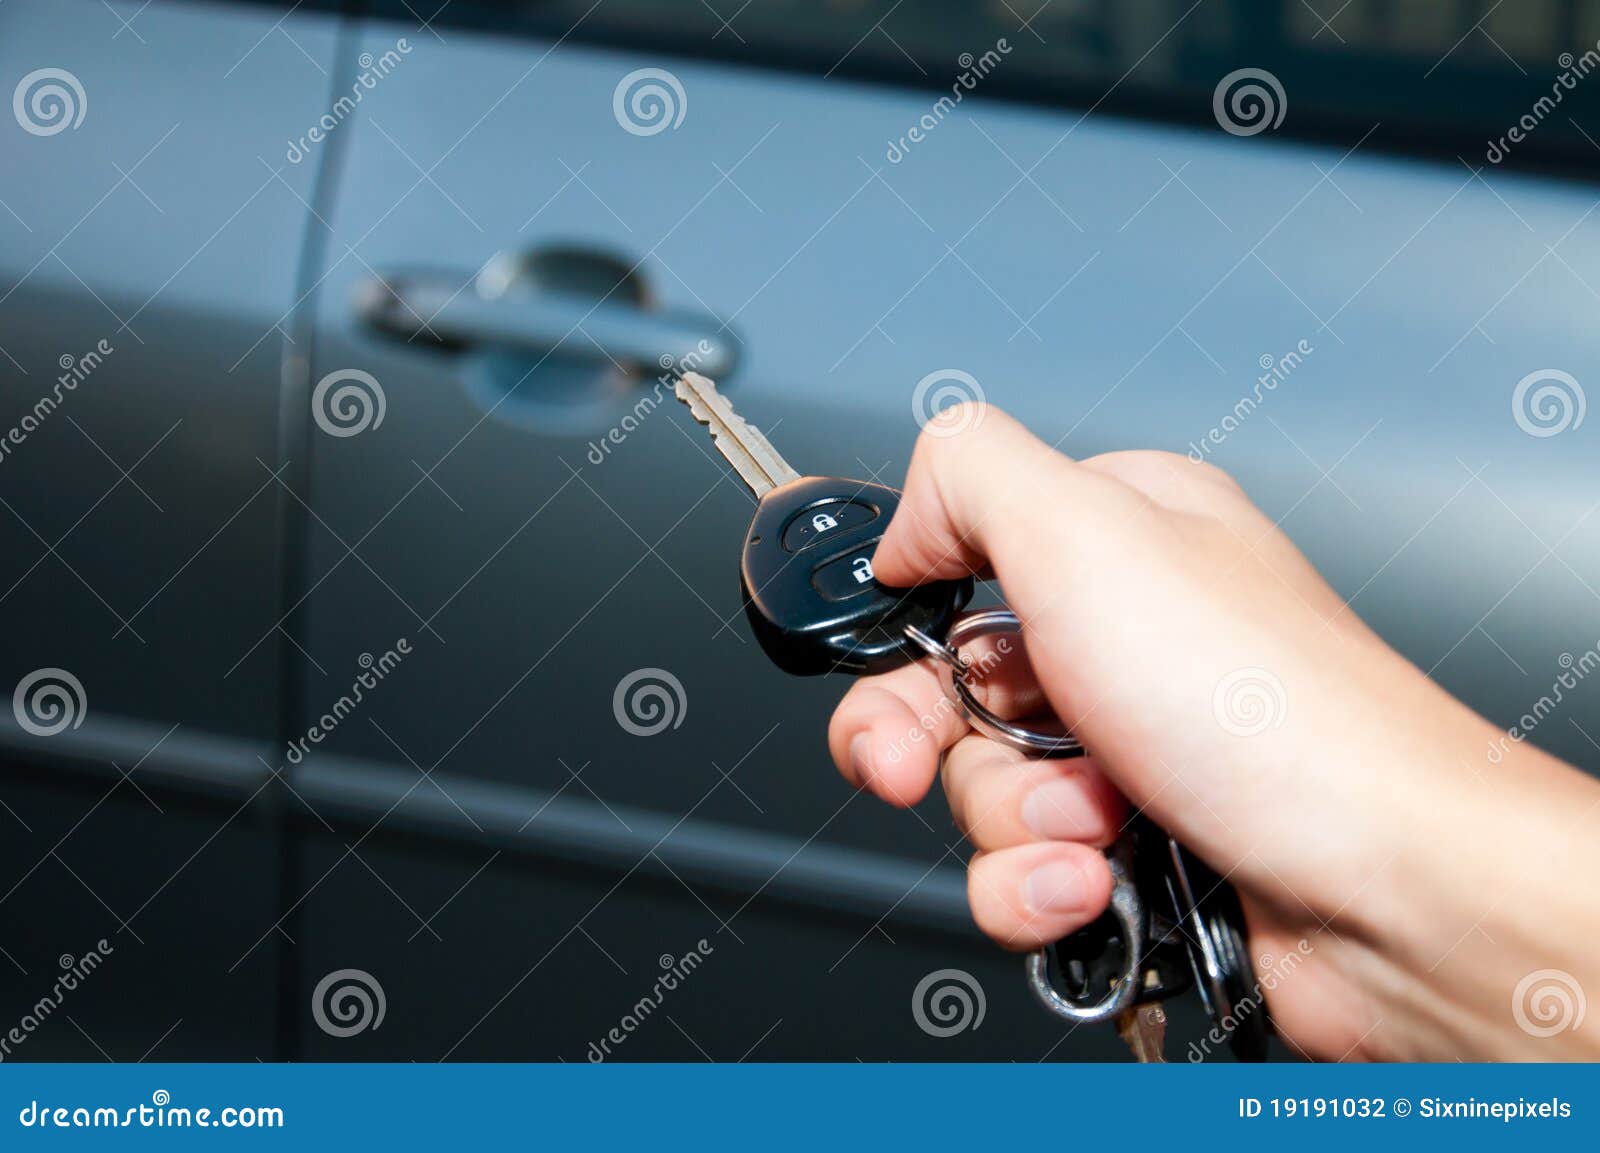 Open Car Door with Remote Control Stock Photo - Image of hanging